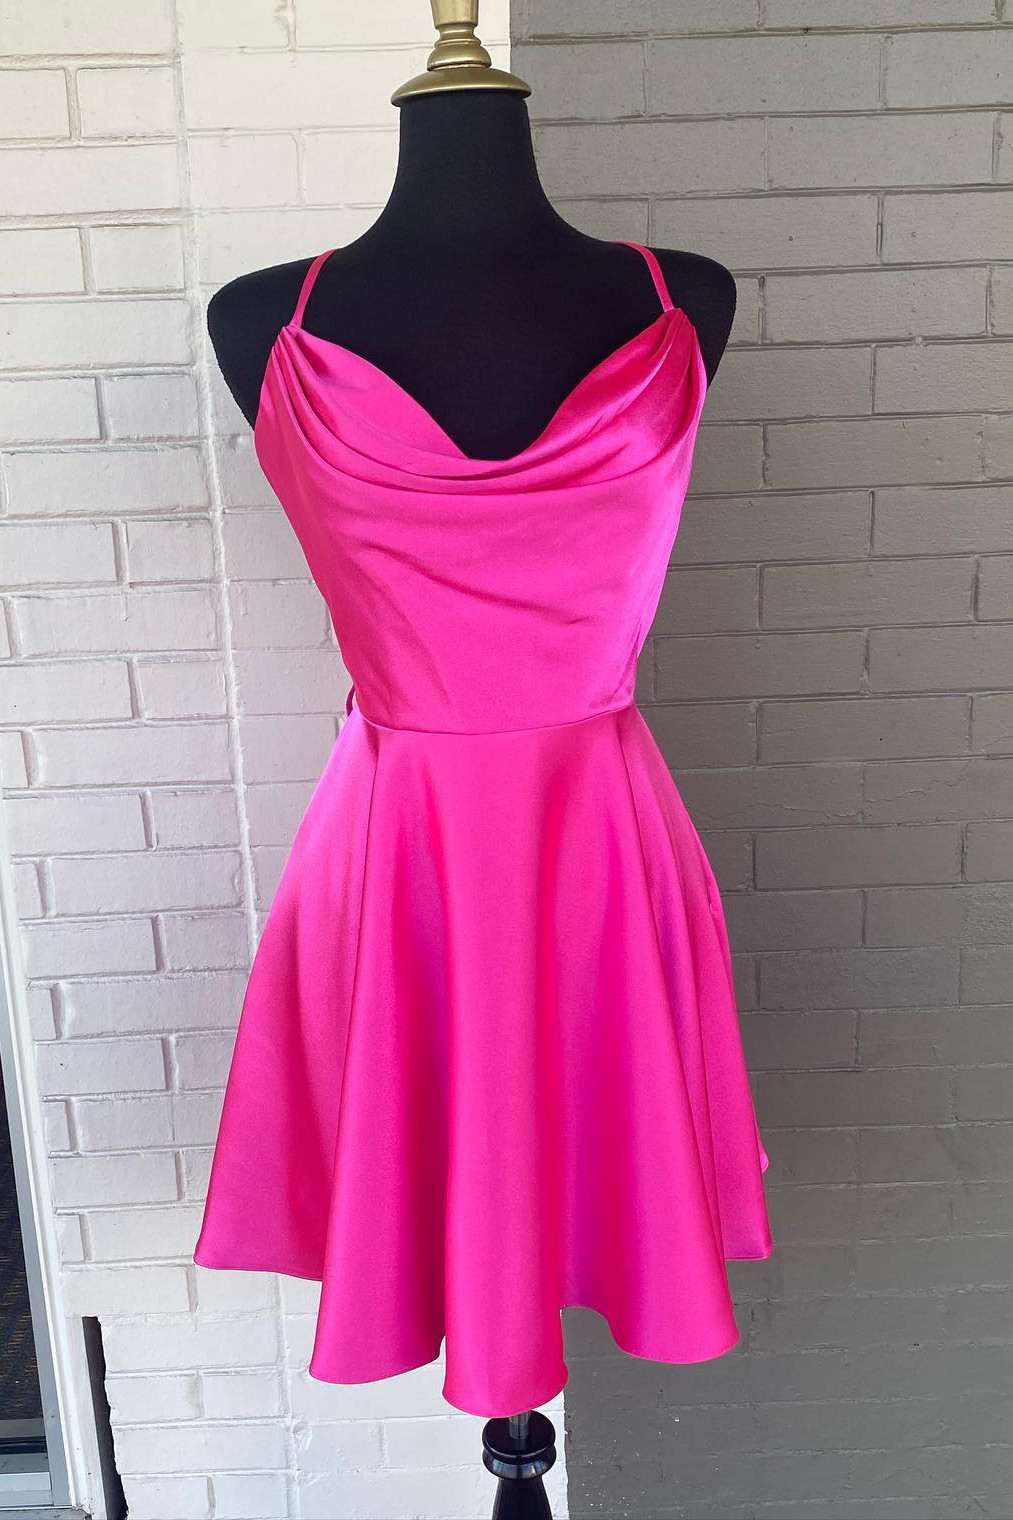 Homecomming Dresses Cute, Neon Pink Lace-Up A-Line Satin Homecoming Dress,Night Dress Party Short